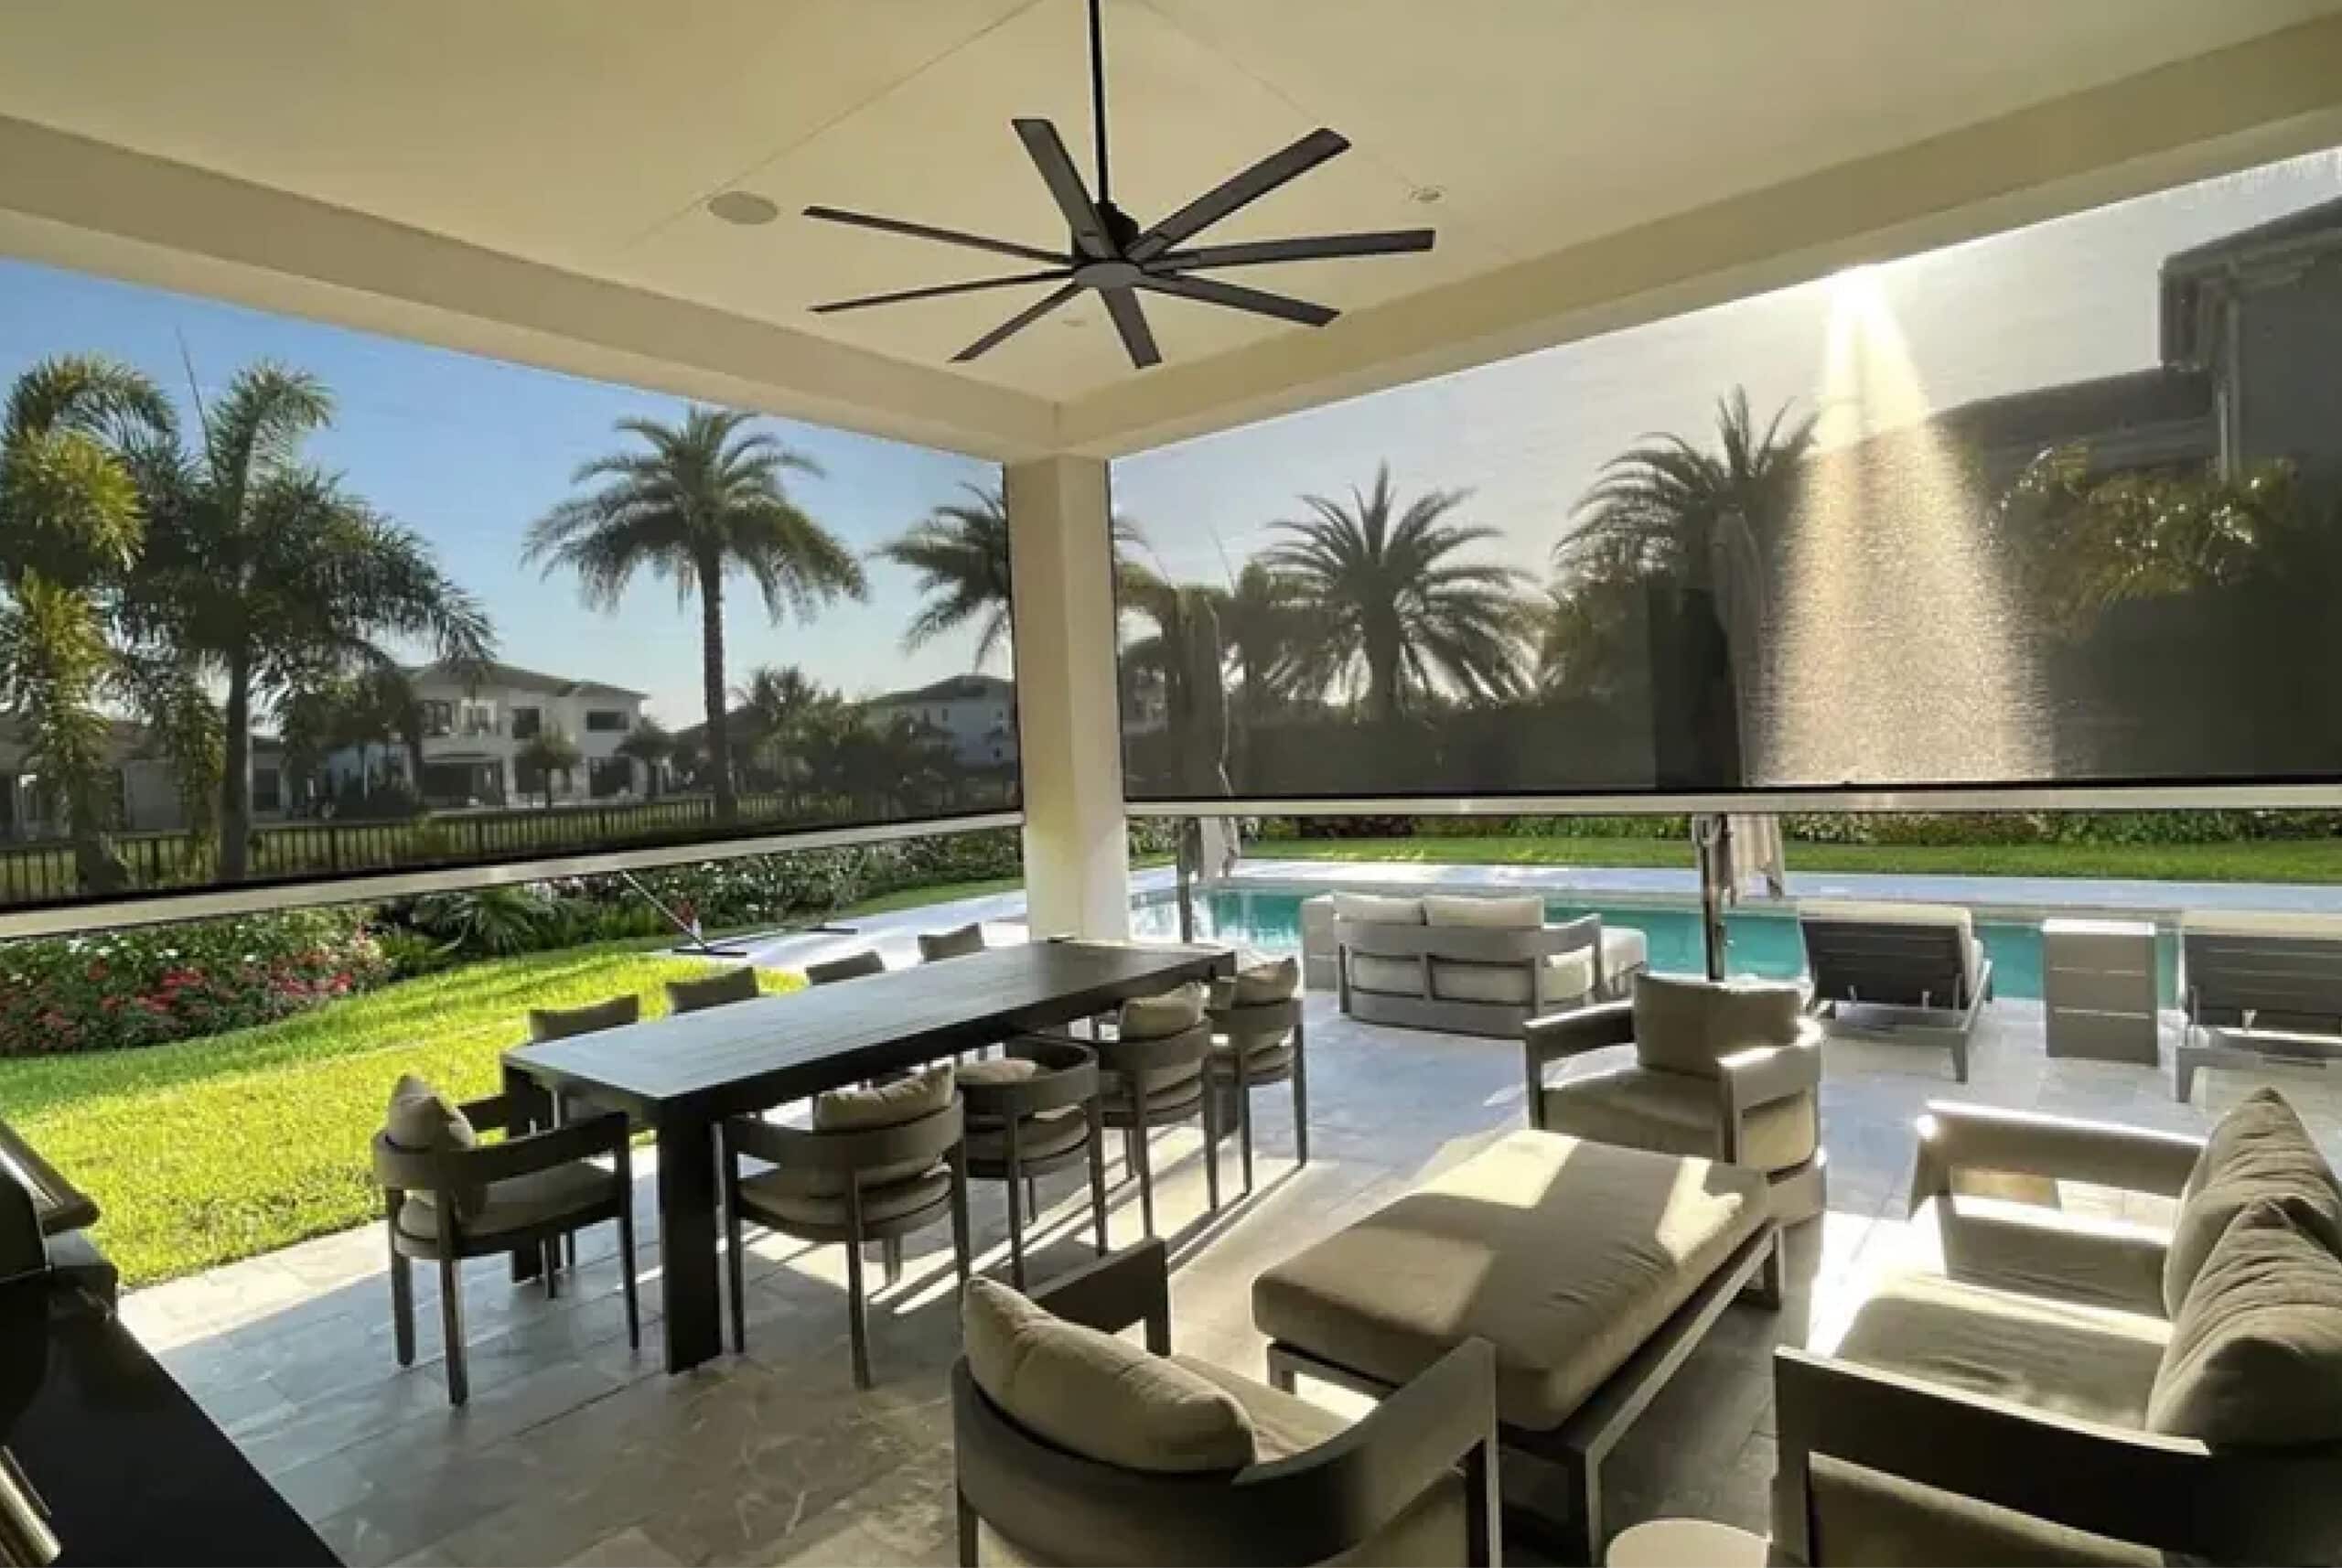 A covered patio with furniture, a ceiling fan, and retractable screens overlooks a swimming pool and landscaped yard in the background, all safeguarded by impact windows for added hurricane protection.